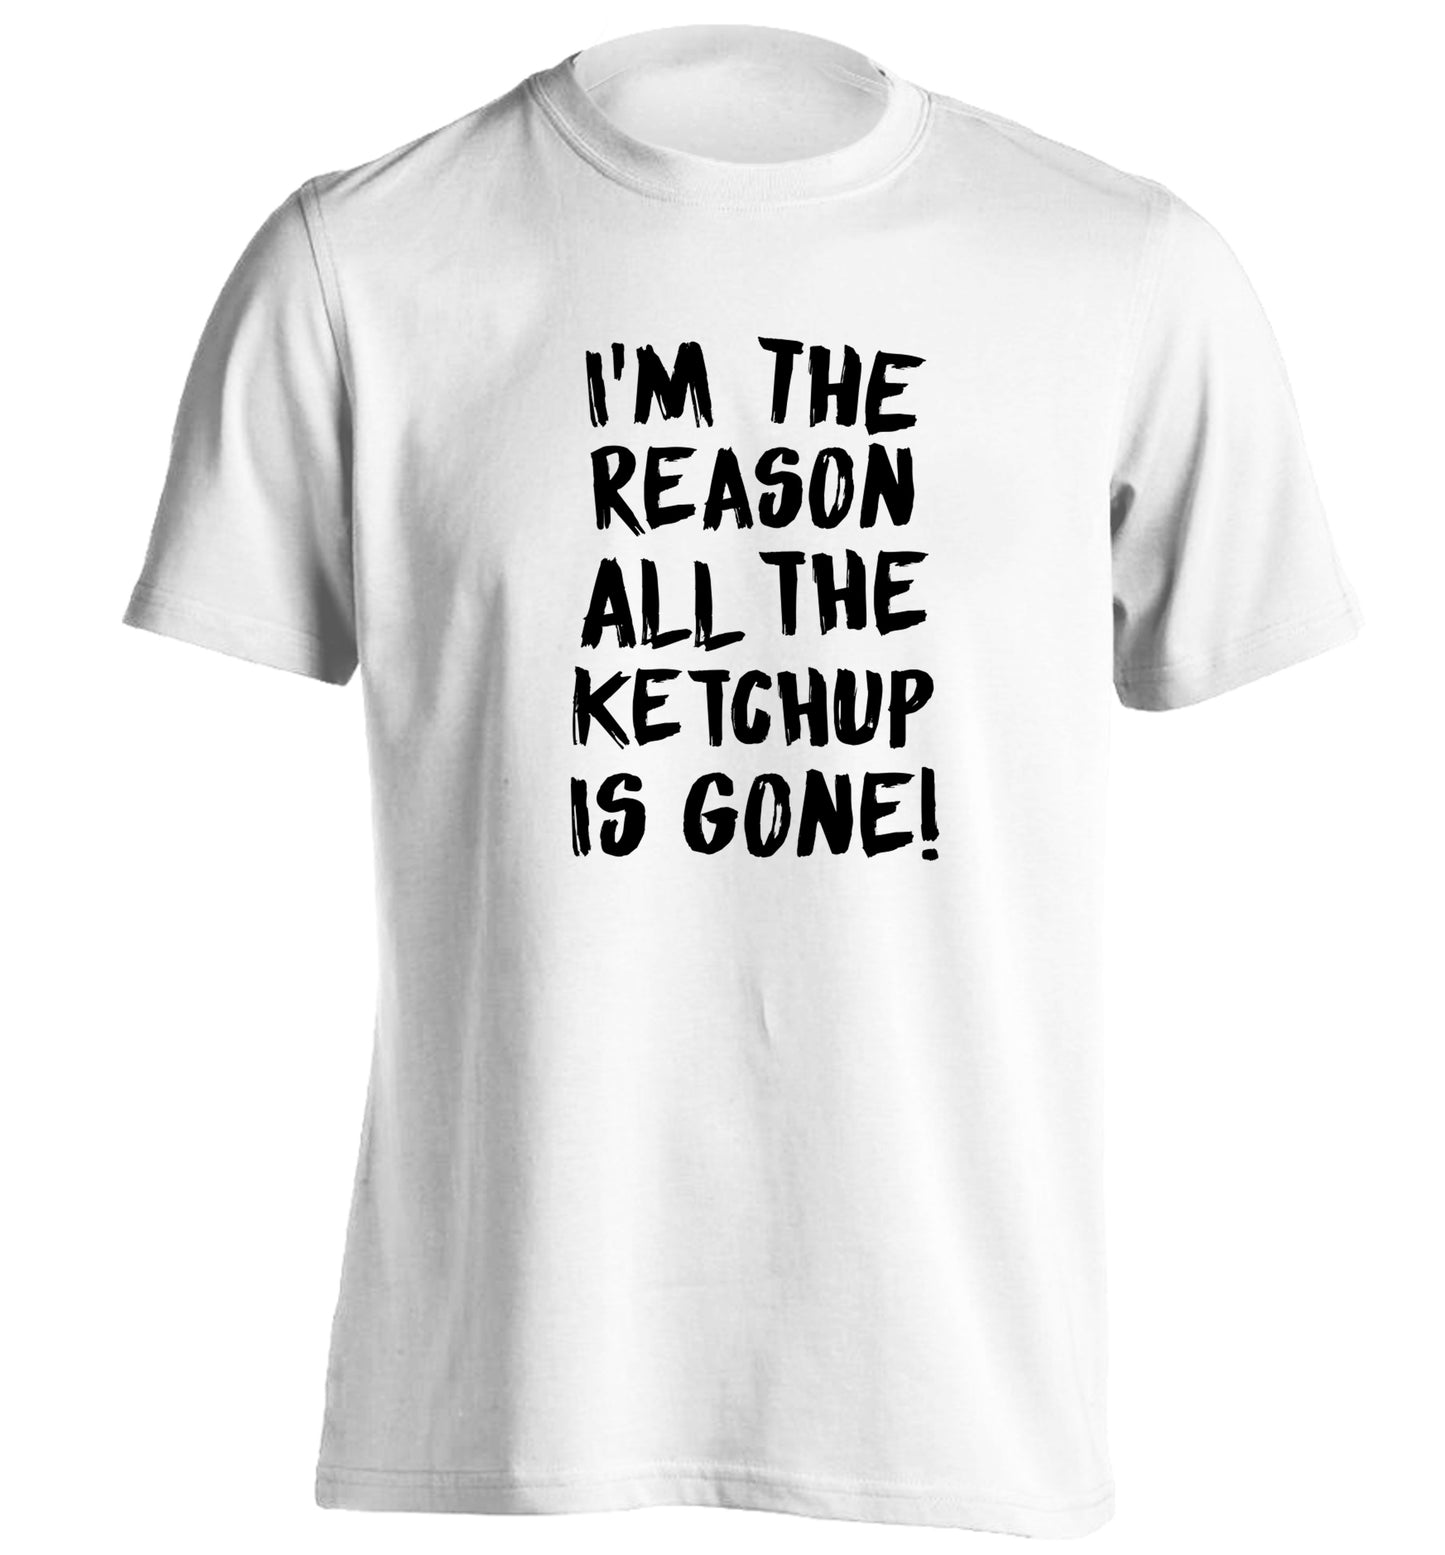 I'm the reason why all the ketchup is gone adults unisex white Tshirt 2XL